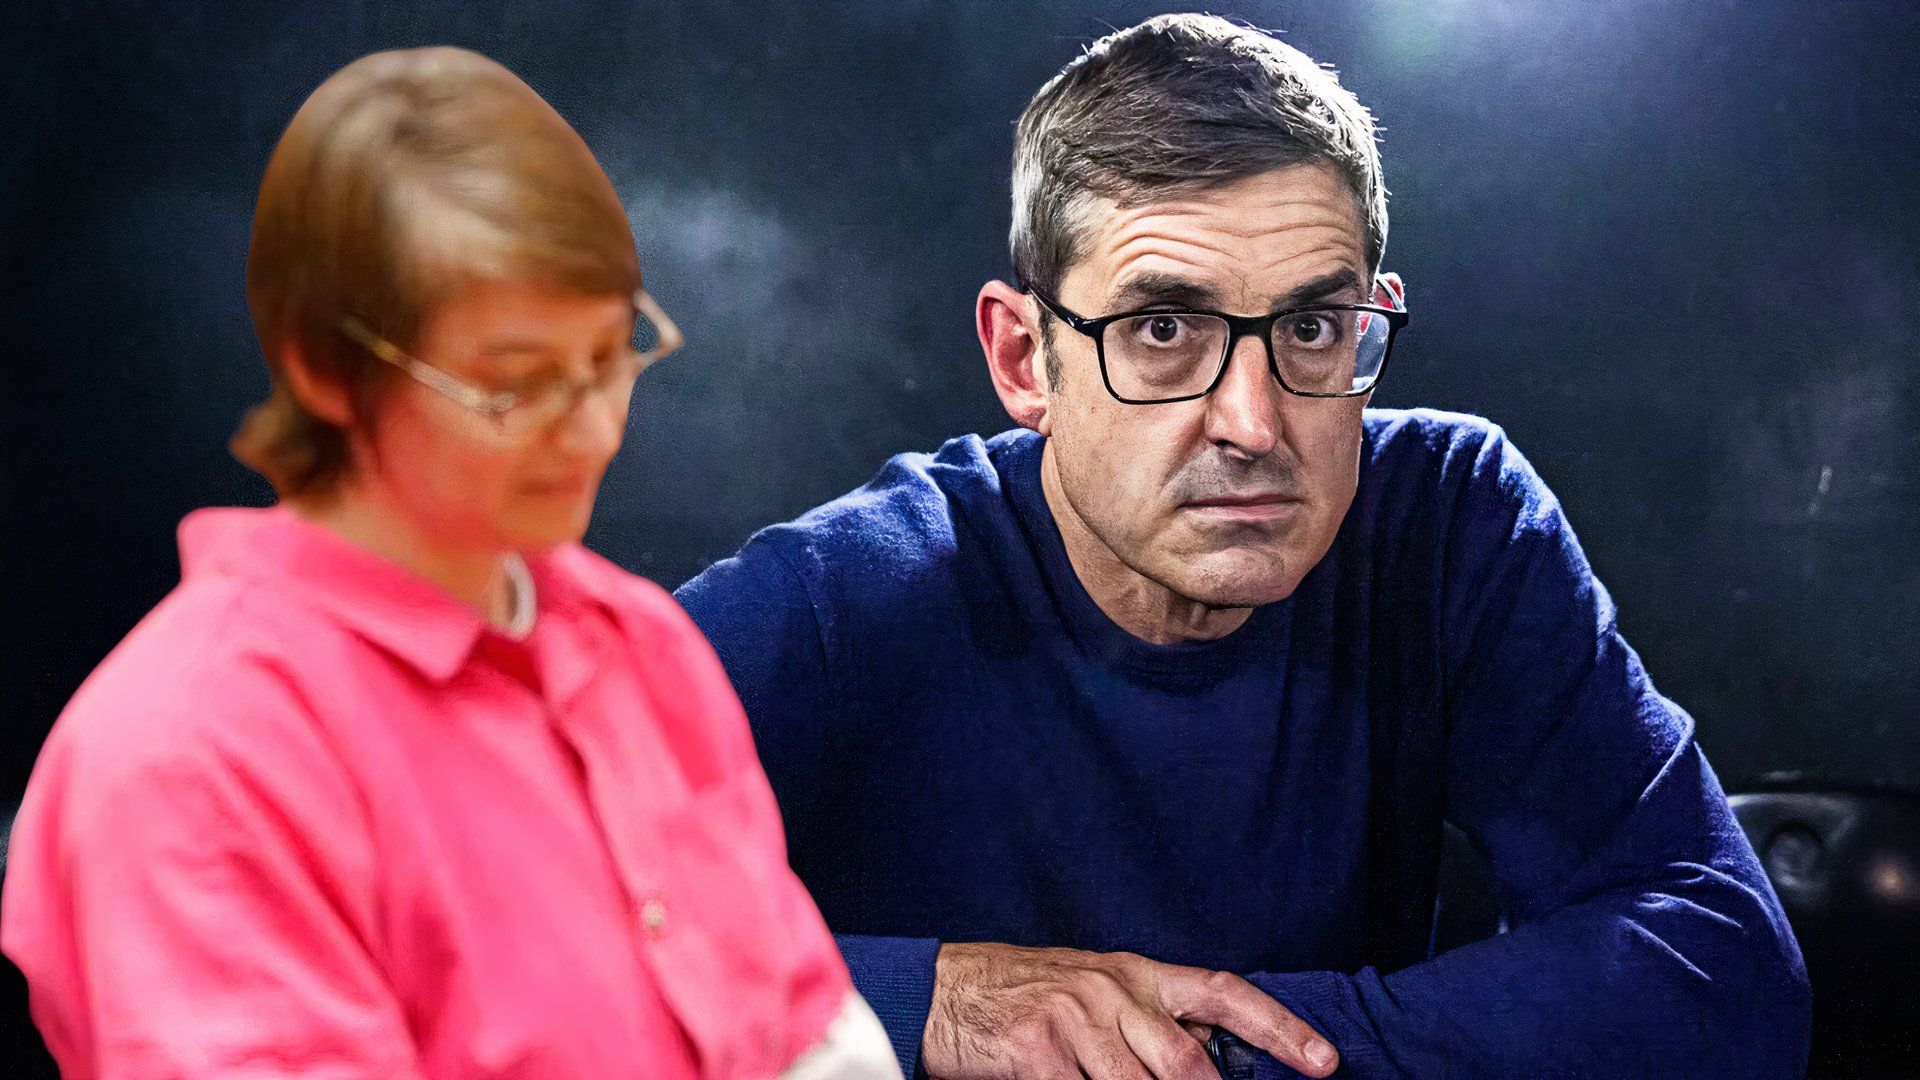 Louis Theroux on the resistance he faced during the production of “Tell Them You Love Me”